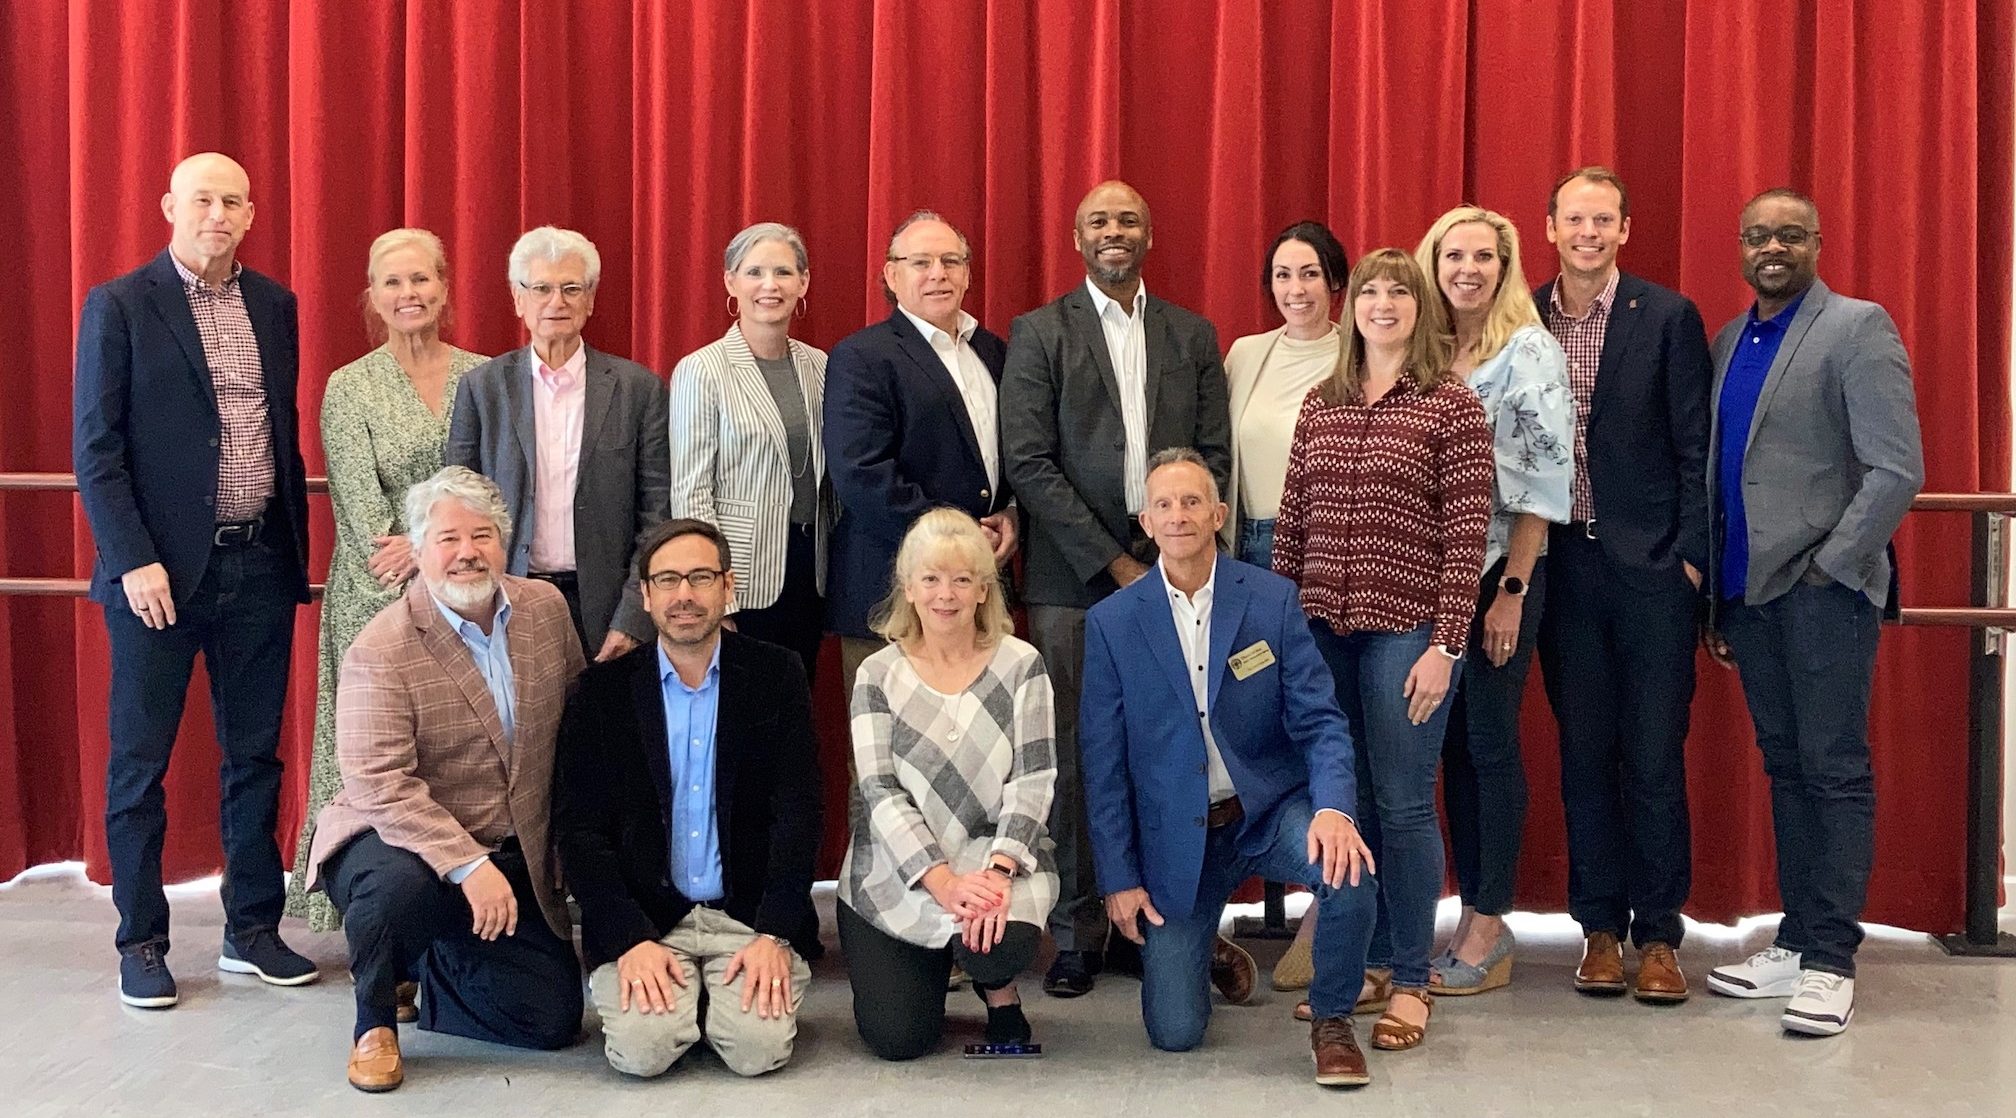 2022 Spring Deans Advisory Council Group Photo